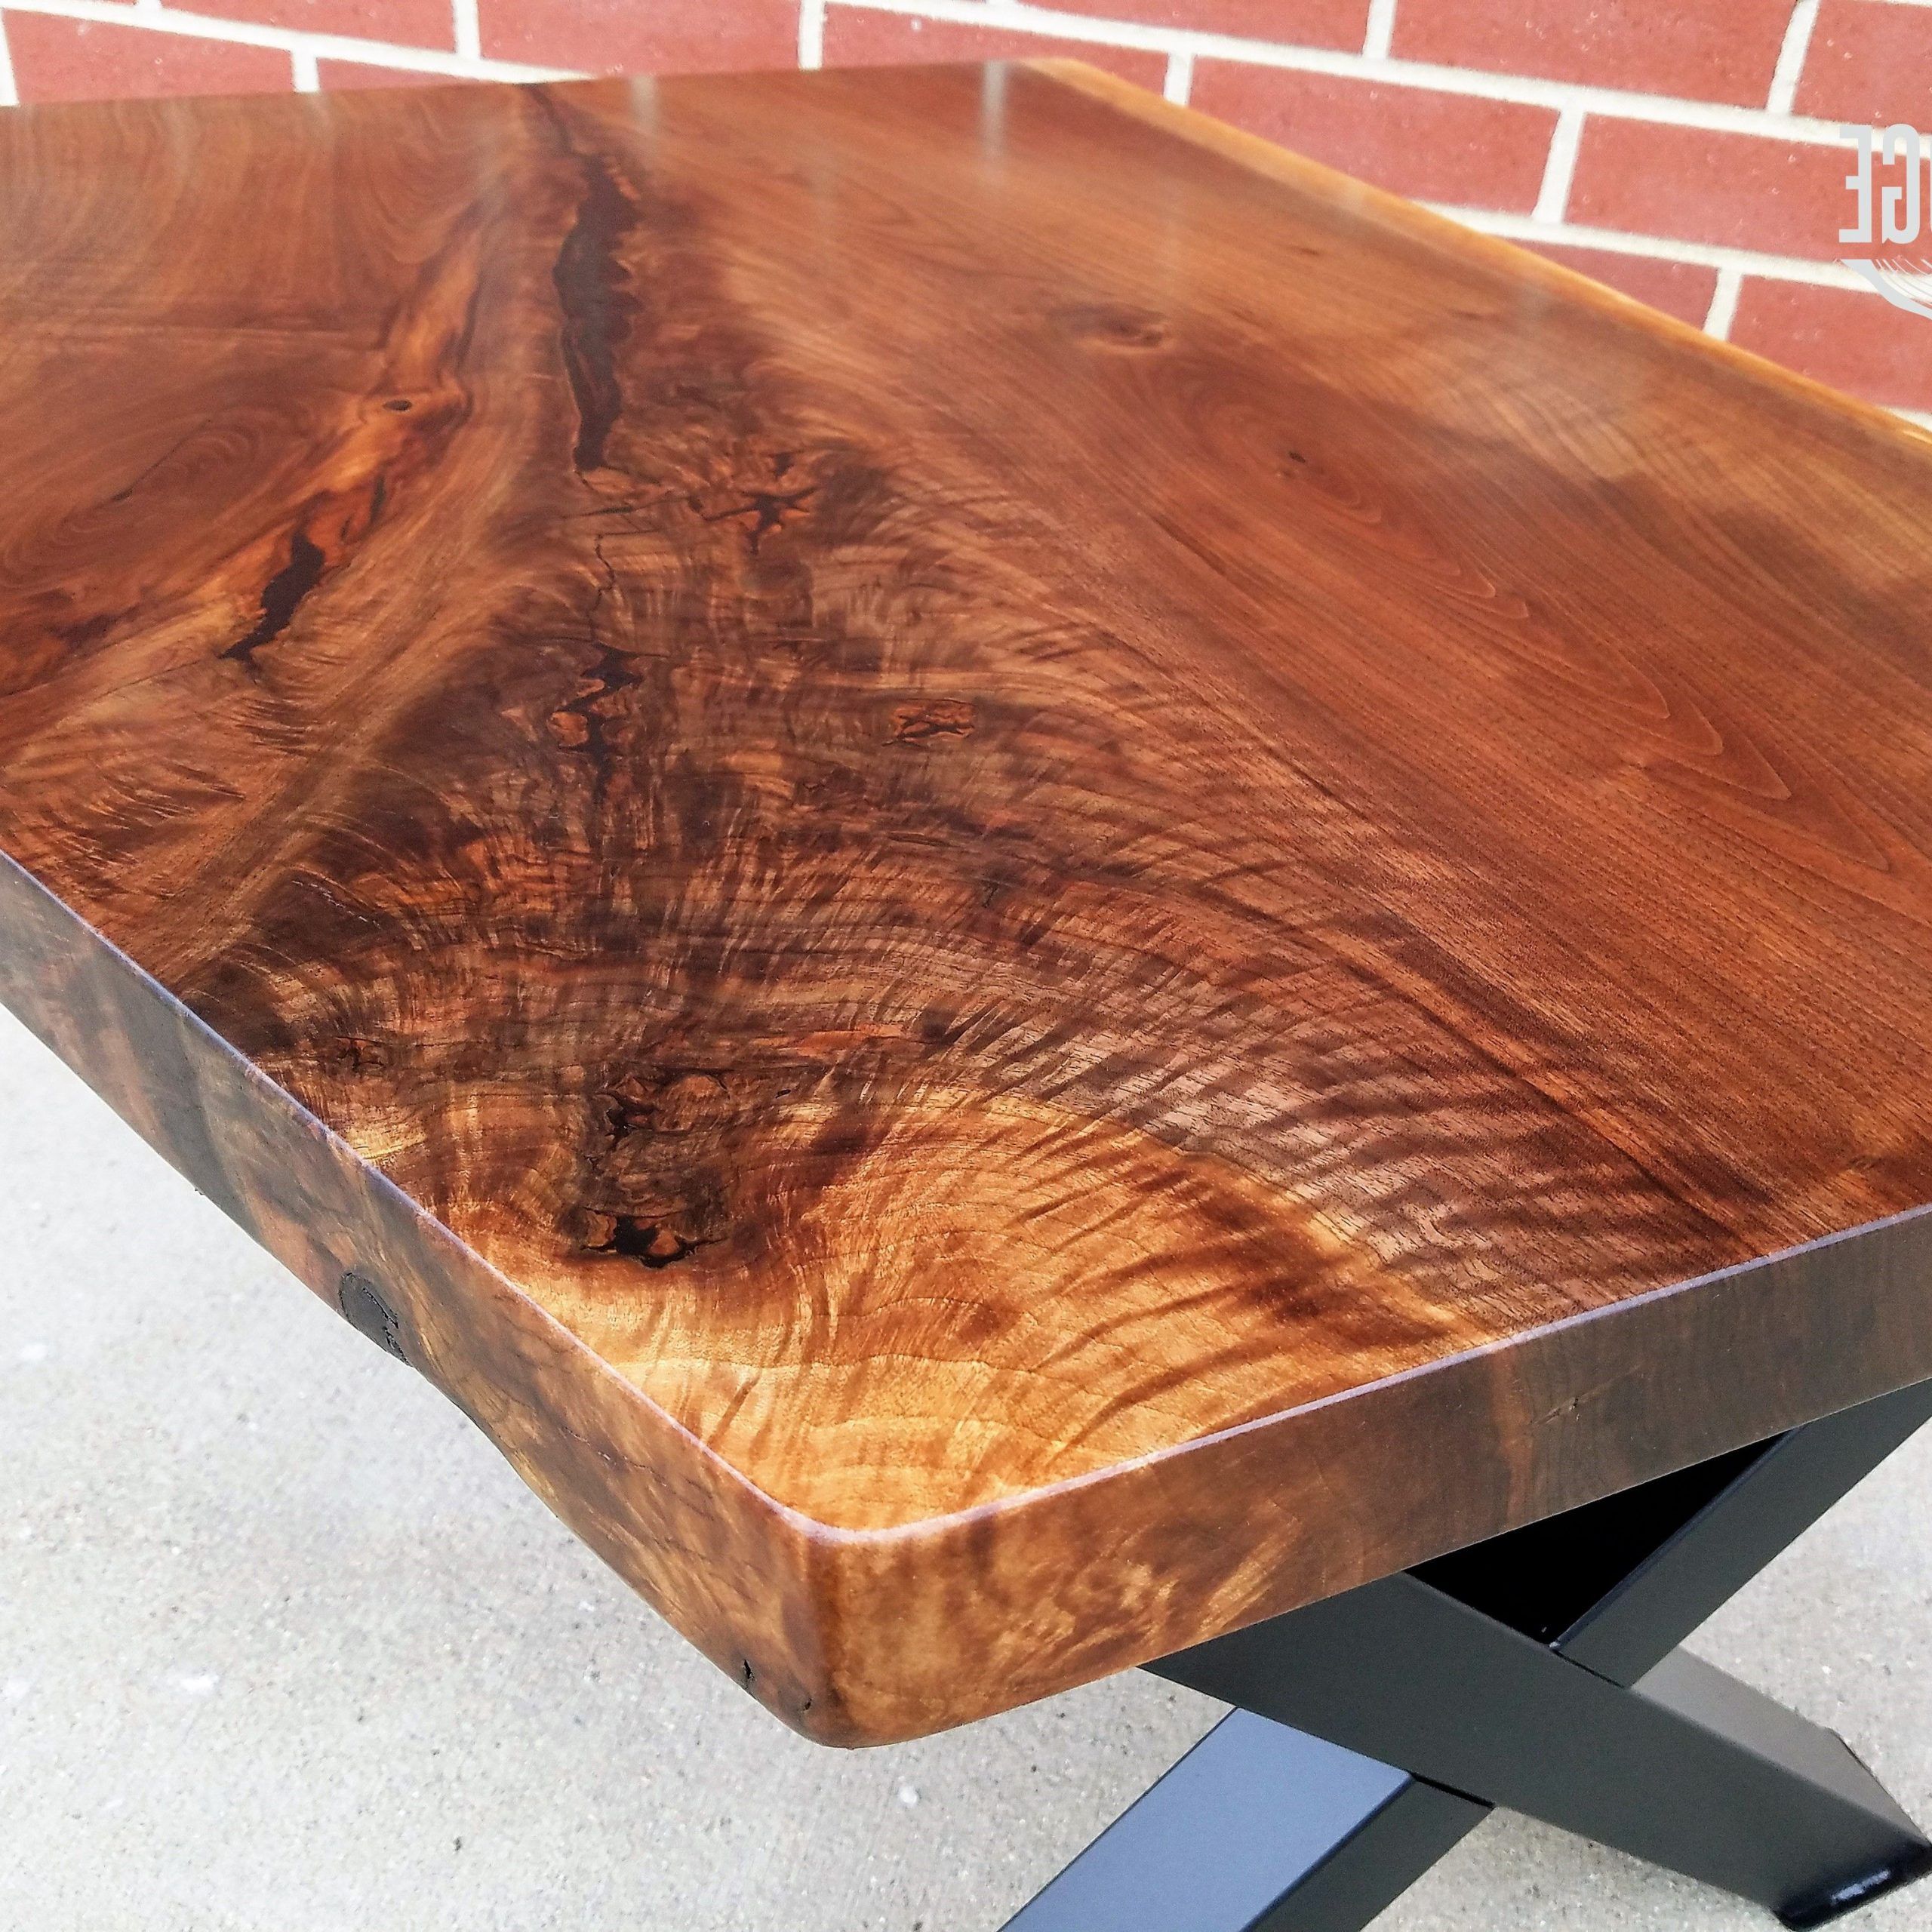 Rustic Walnut Wood Coffee Tables Intended For 2018 Hand Crafted Live Edge Coffee Table  Black Walnut  X Style (View 7 of 20)